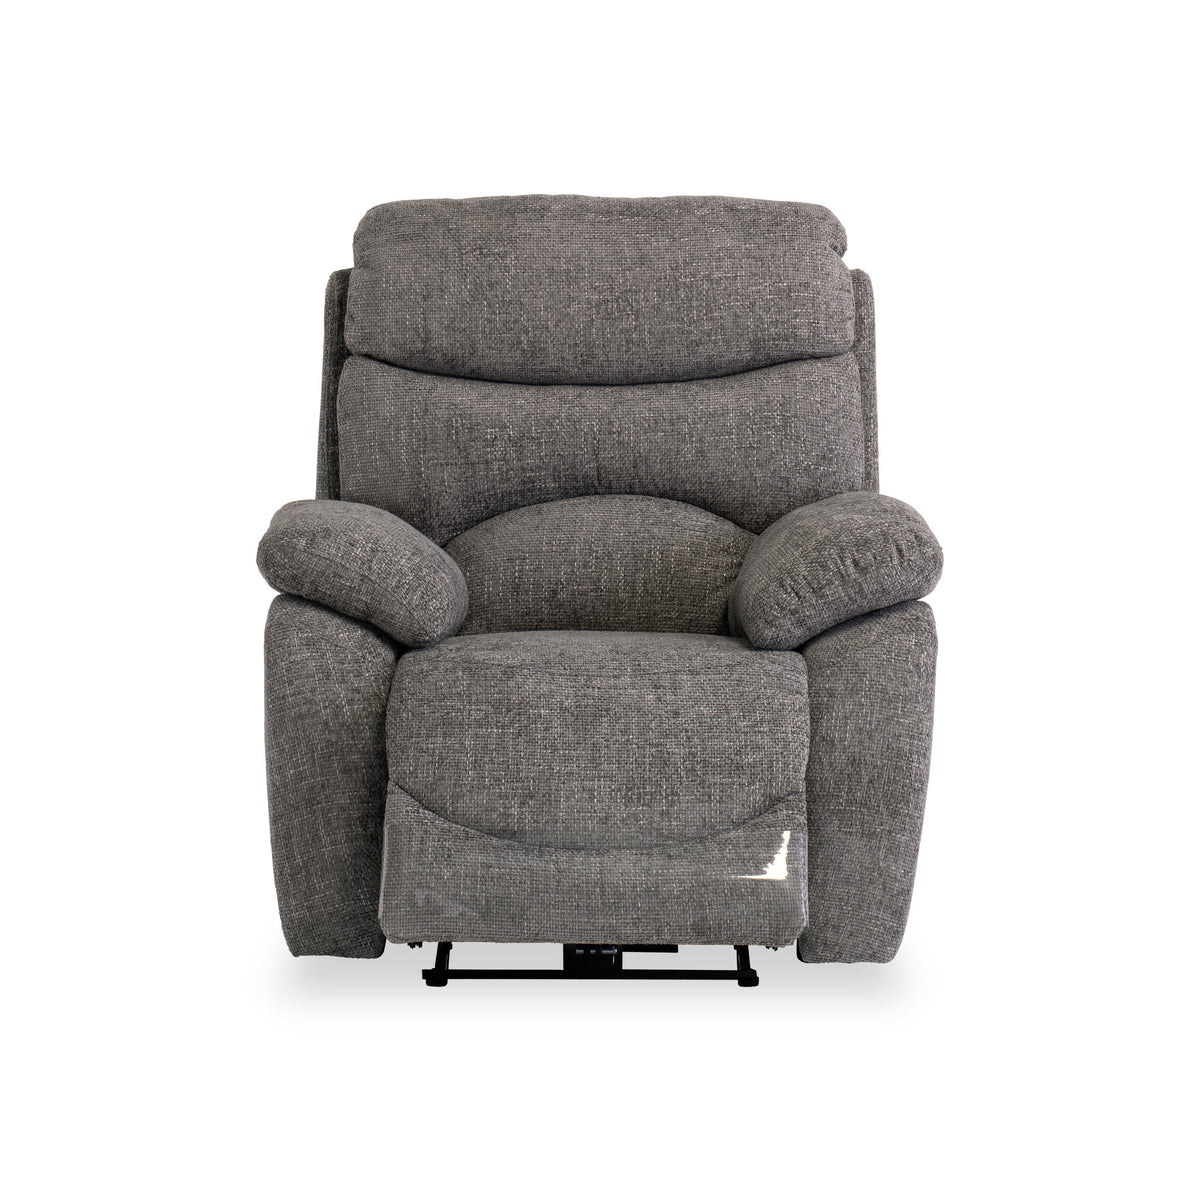 Seville Ash Fabric Electric Reclining Armchair from Roseland Furniture